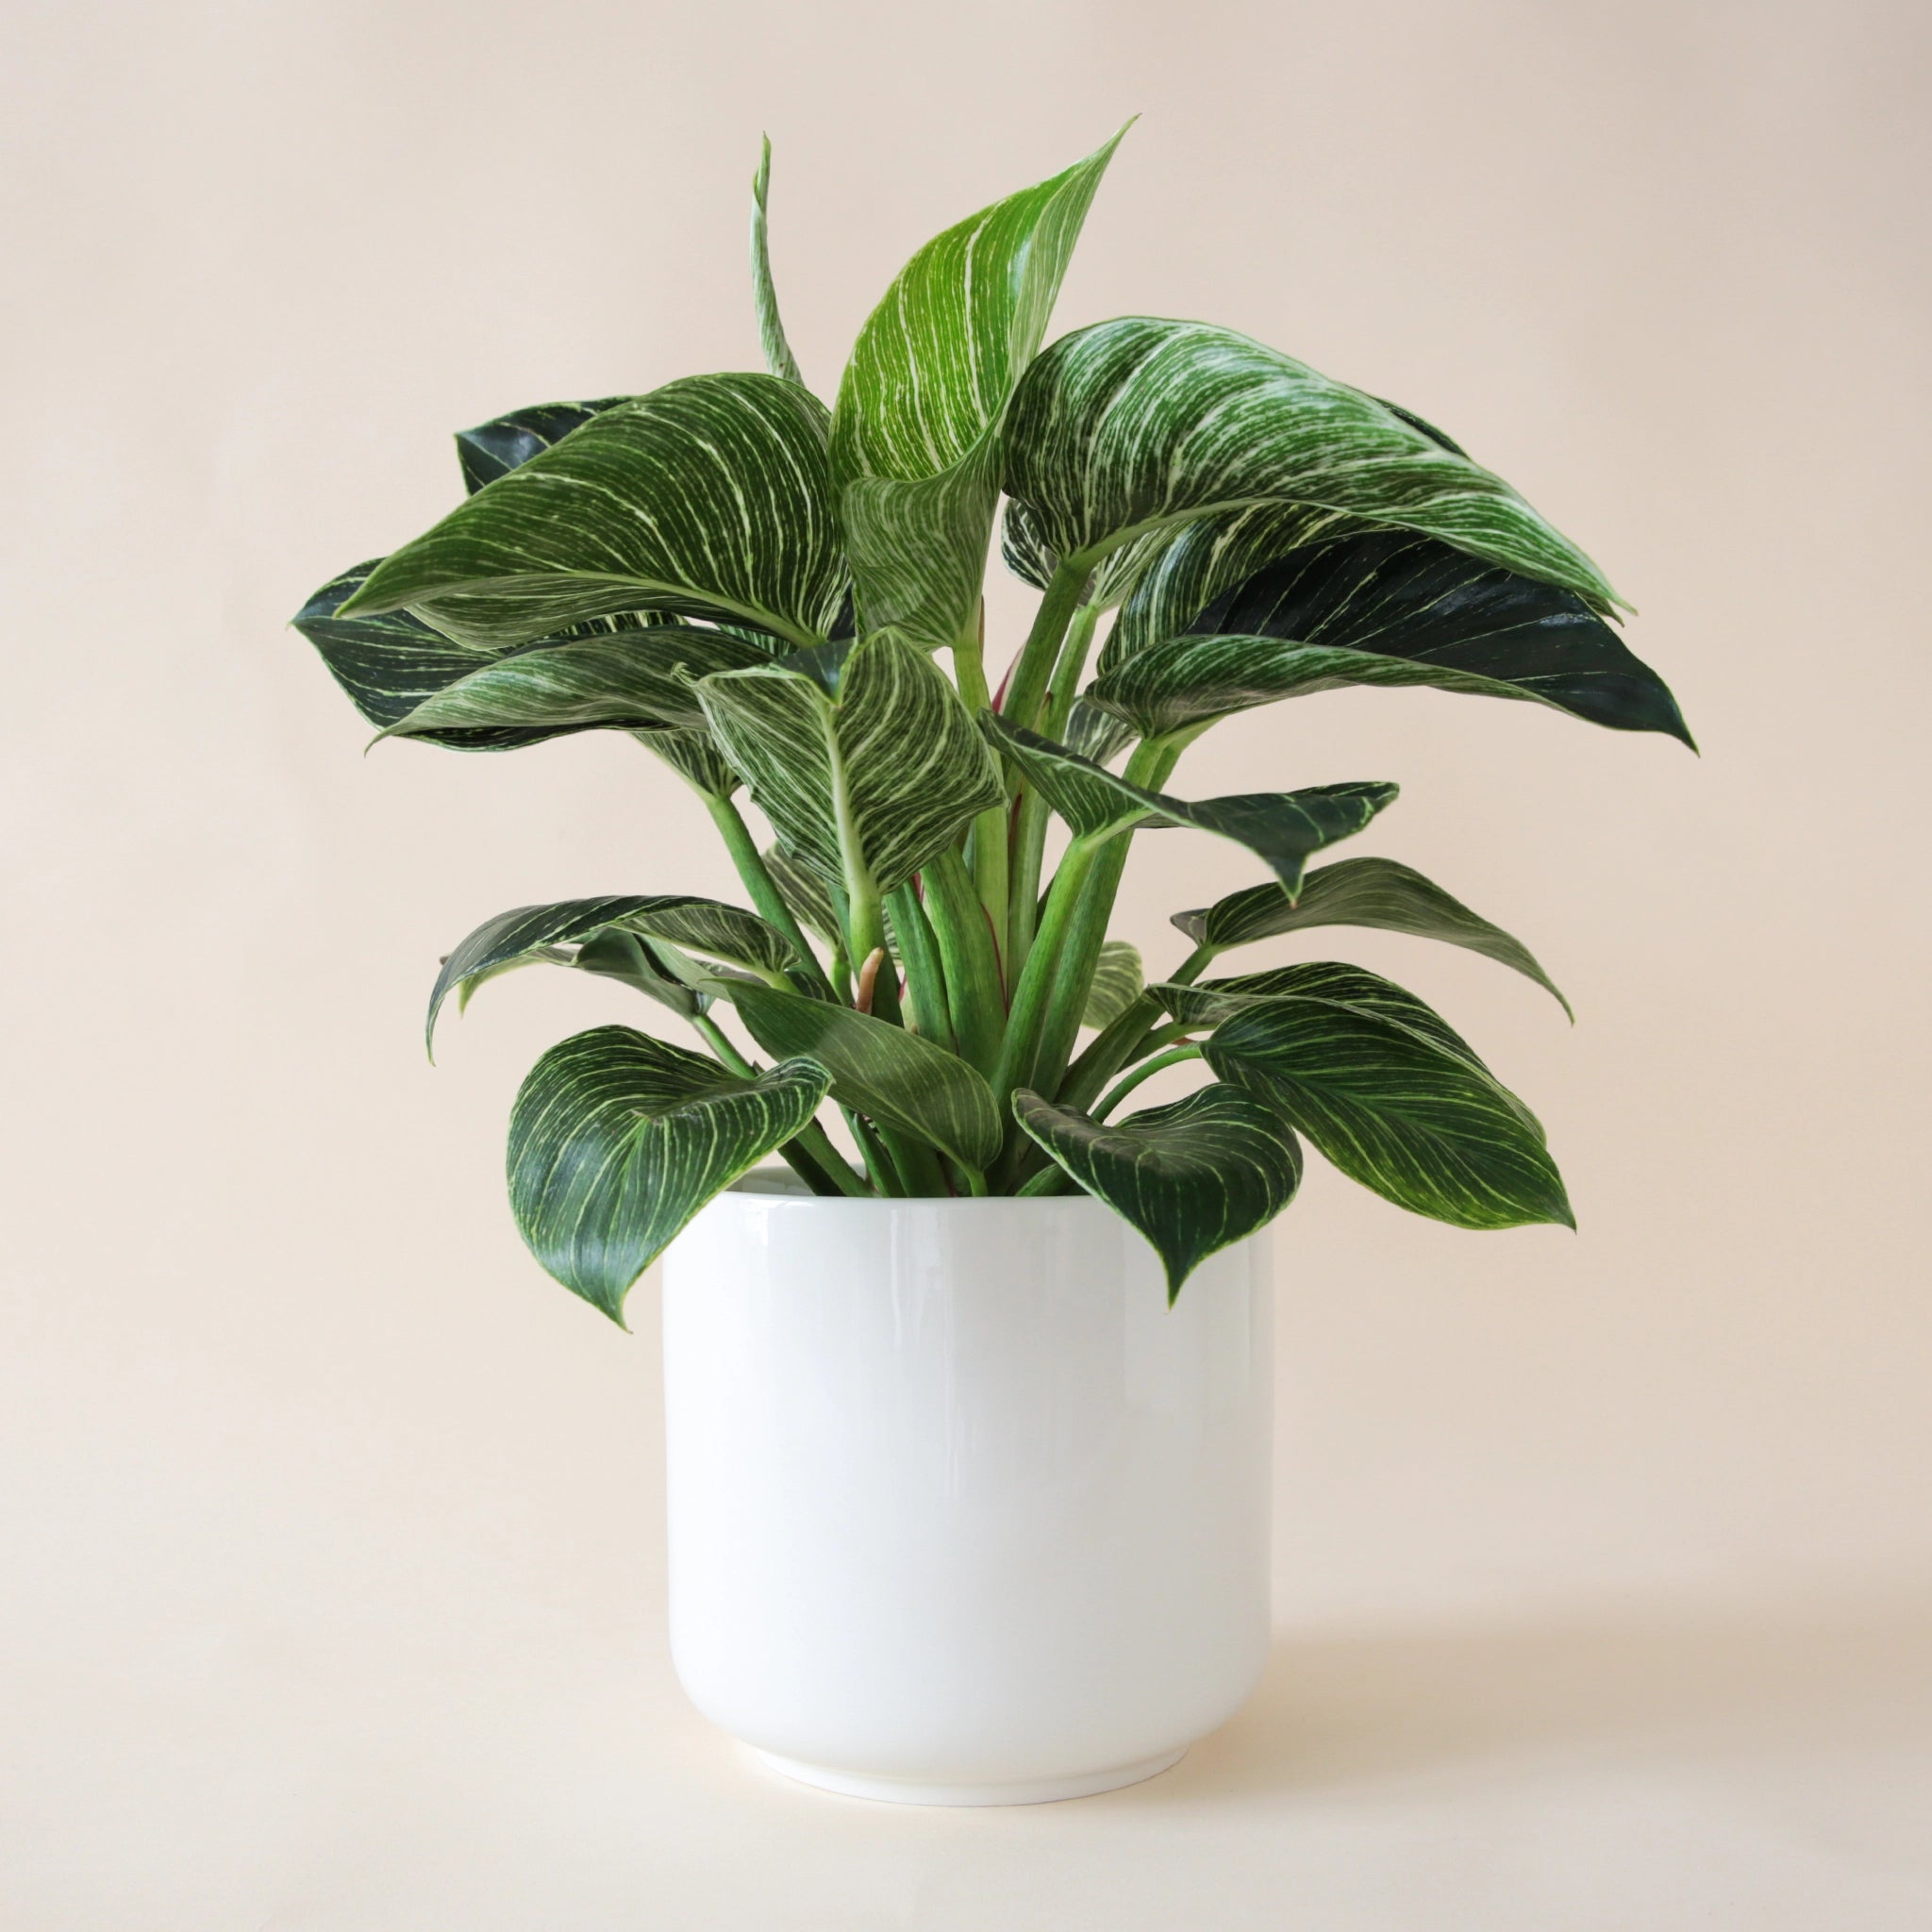 In front of a white background is a round white pot.  Inside the pot is a philodendron brikin. The light green stems are tall and stick straight up. Most of the leaves are green and pointed at the top. Some of the leaves have white stripes.